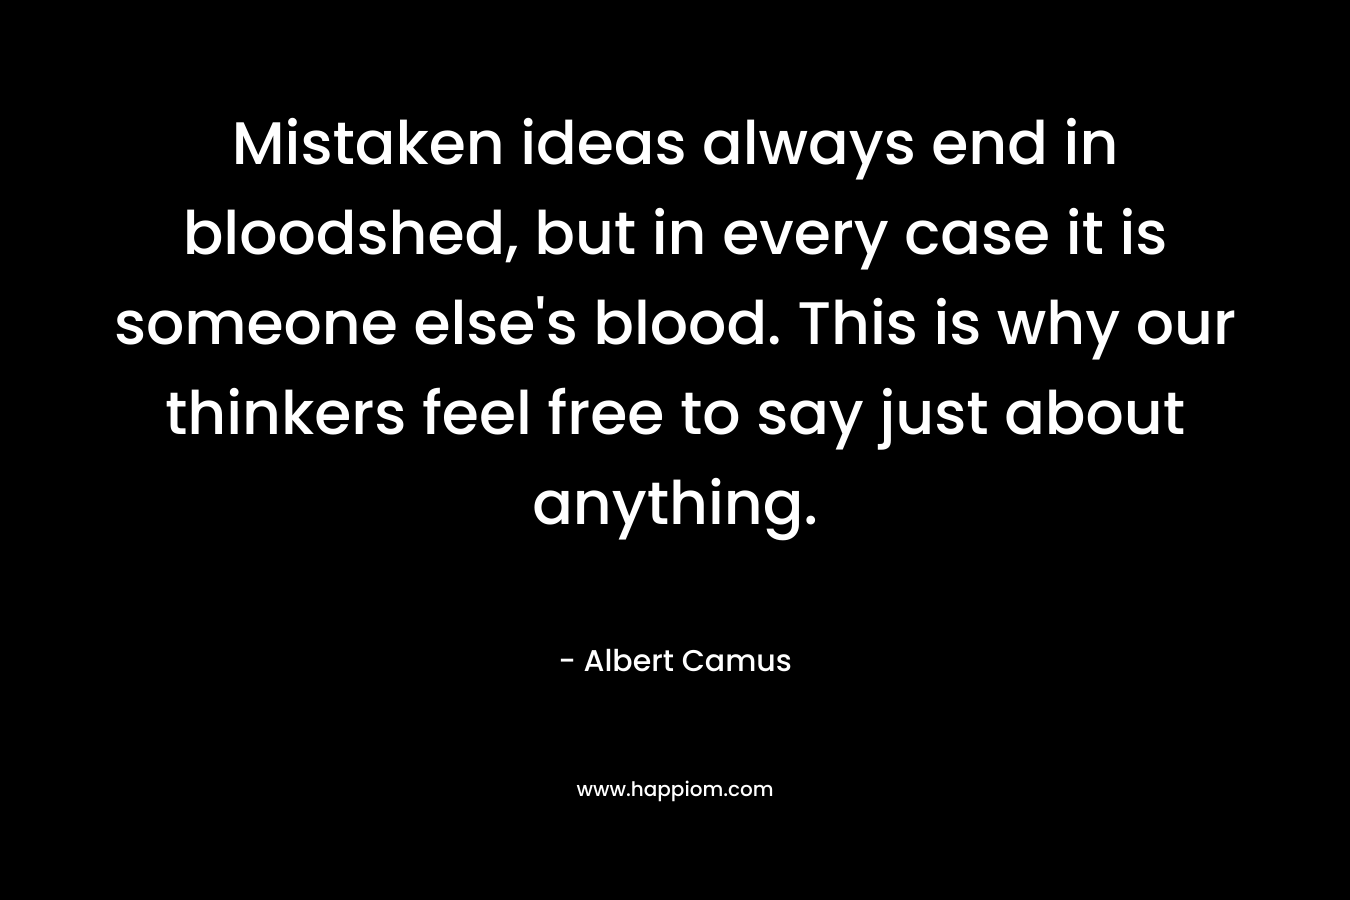 Mistaken ideas always end in bloodshed, but in every case it is someone else’s blood. This is why our thinkers feel free to say just about anything. – Albert Camus